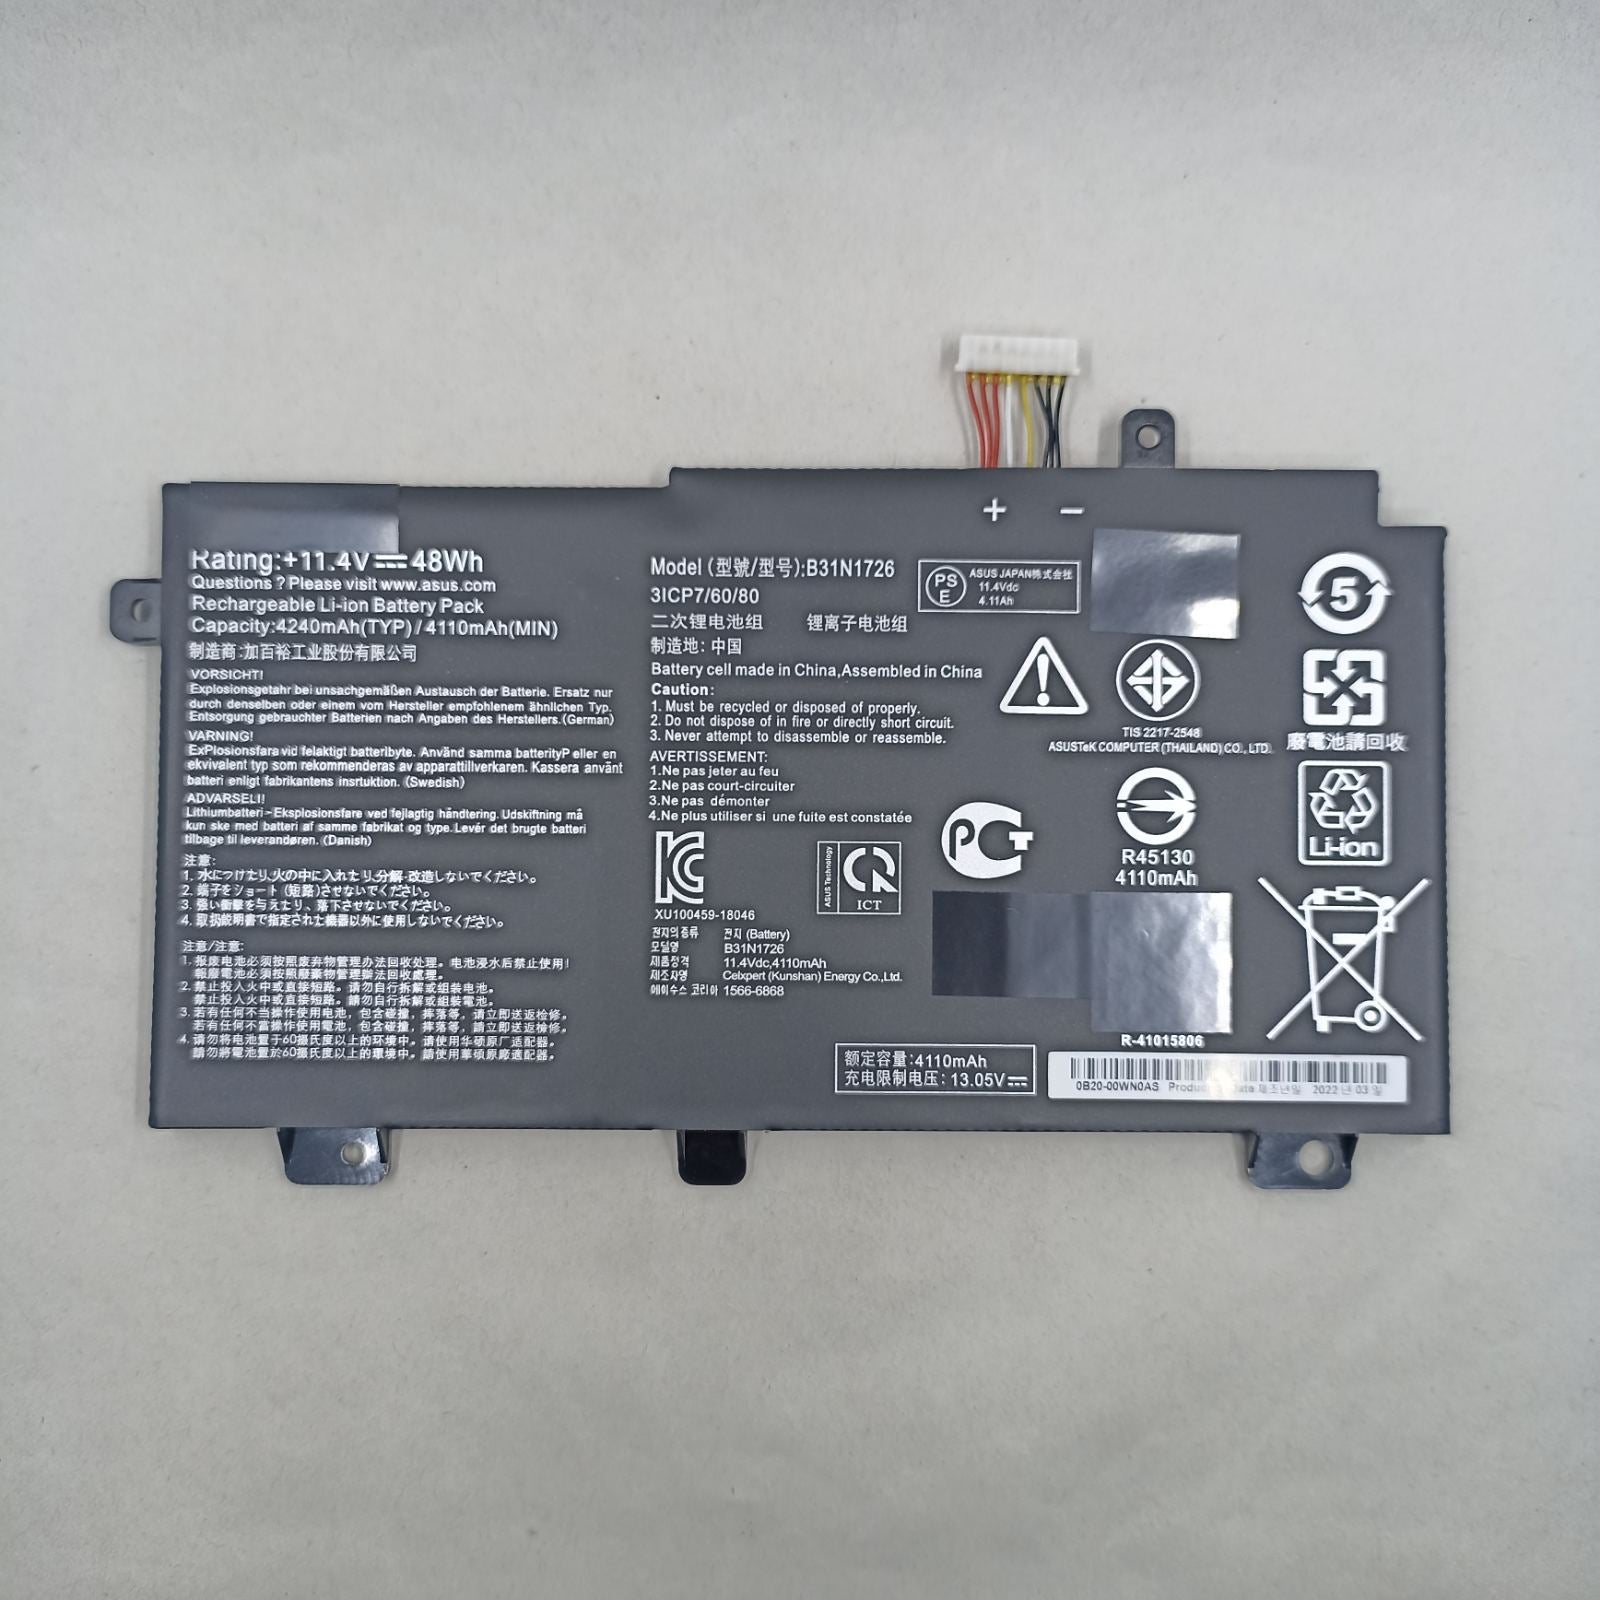 Replacement Battery for Asus FX505GD A1